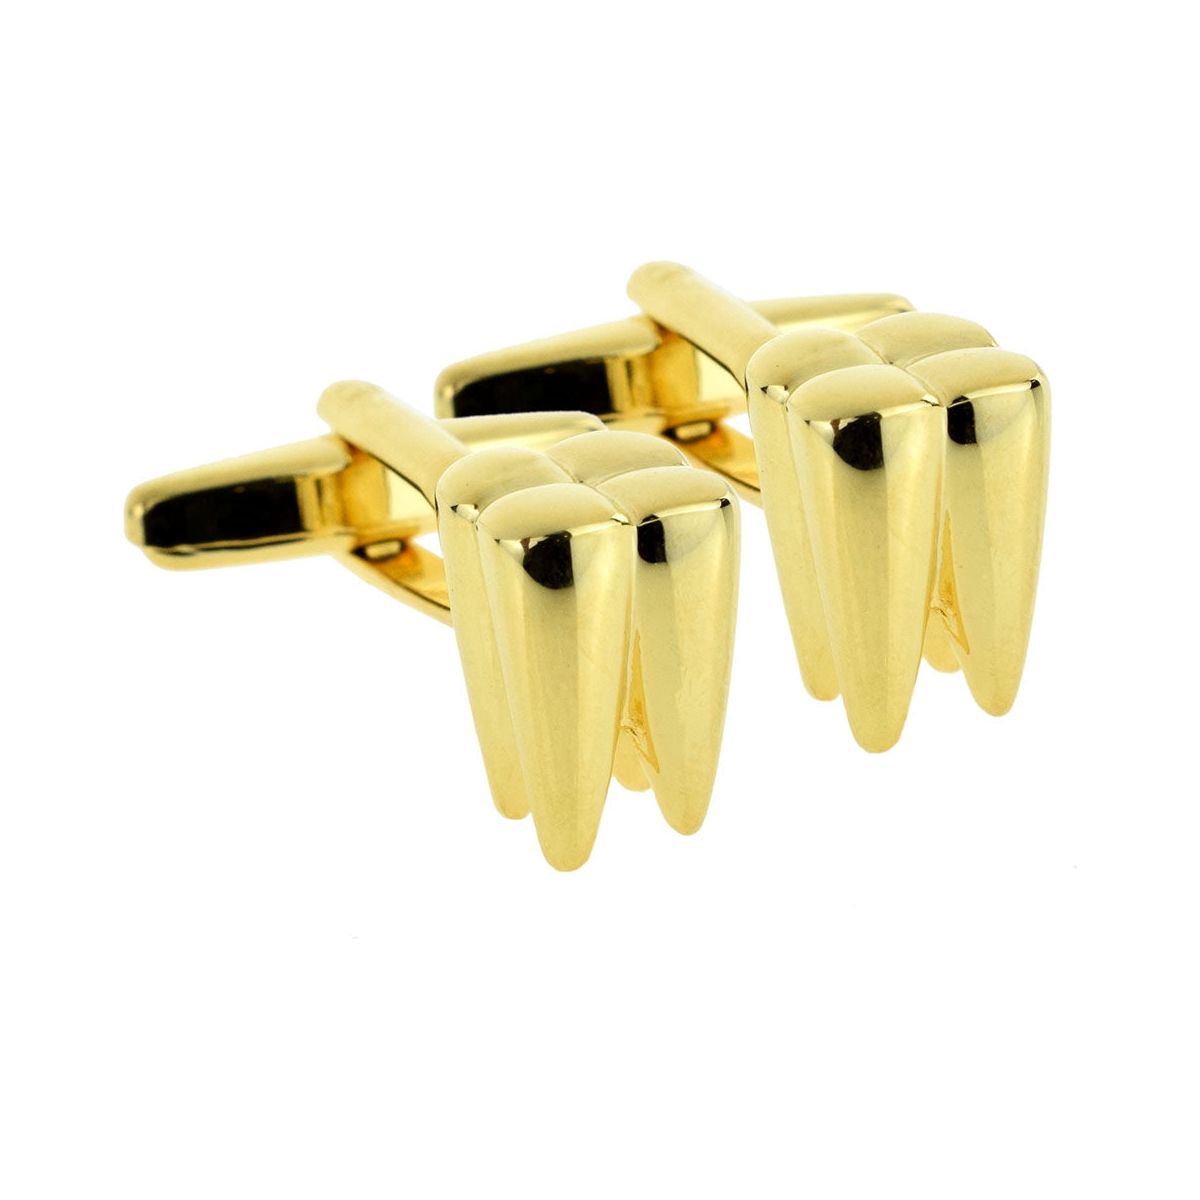 Gold Plated Extracted Tooth Cufflinks - Ashton and Finch